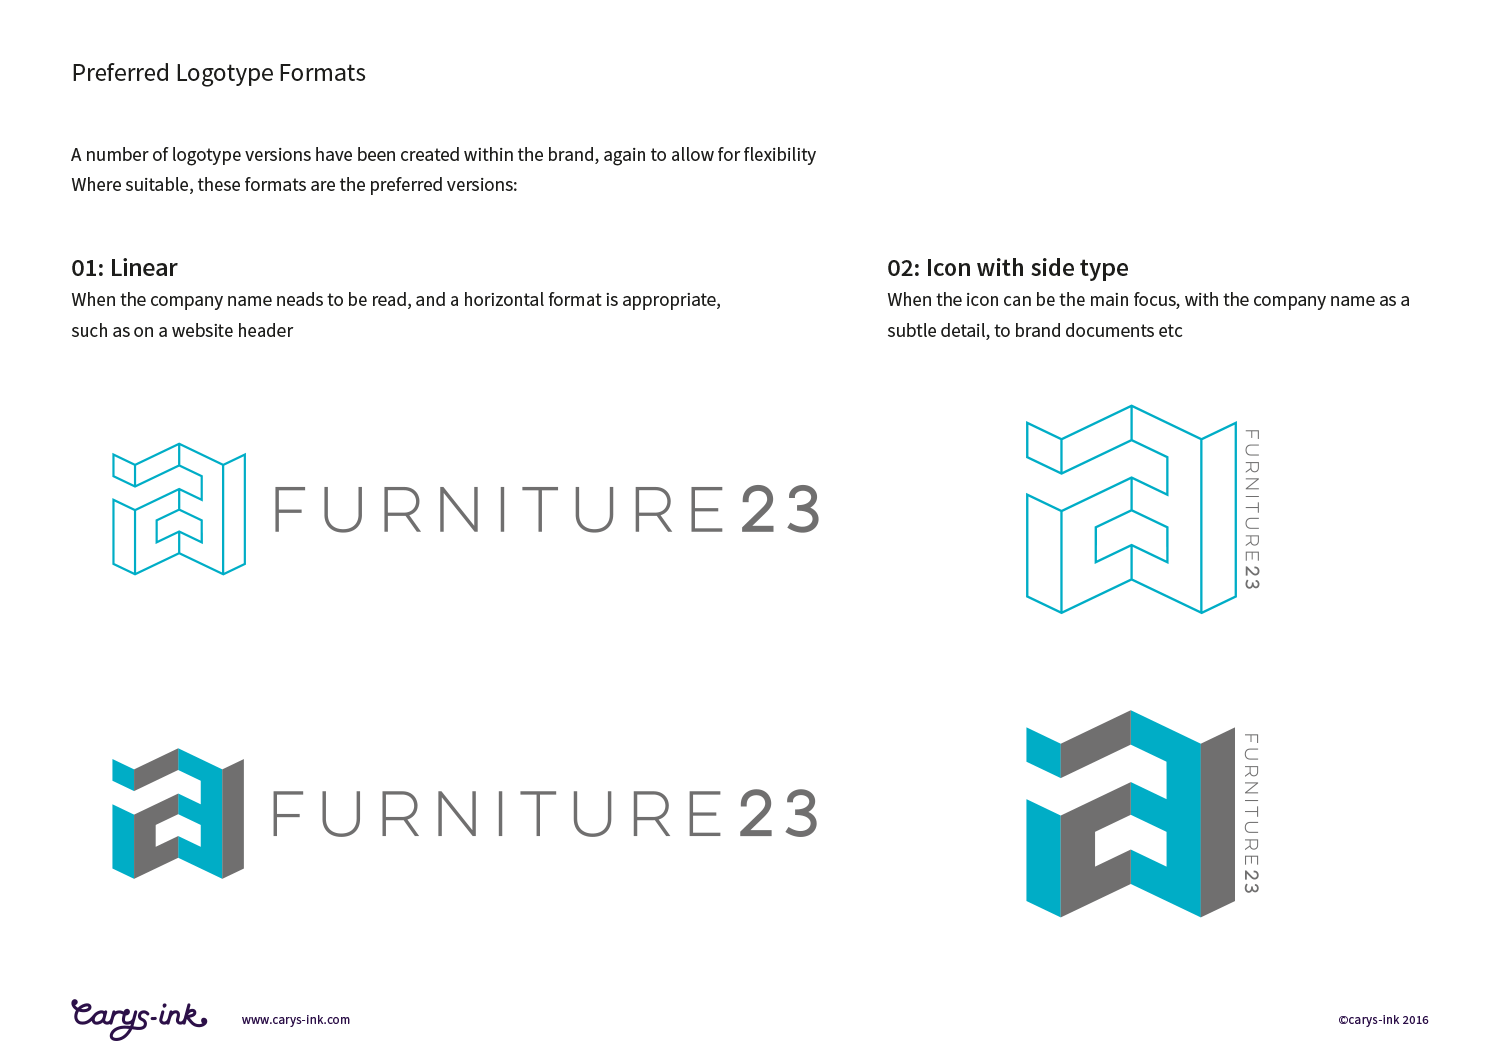 F23_Brand_Identity_Delivery_Guide-4.png